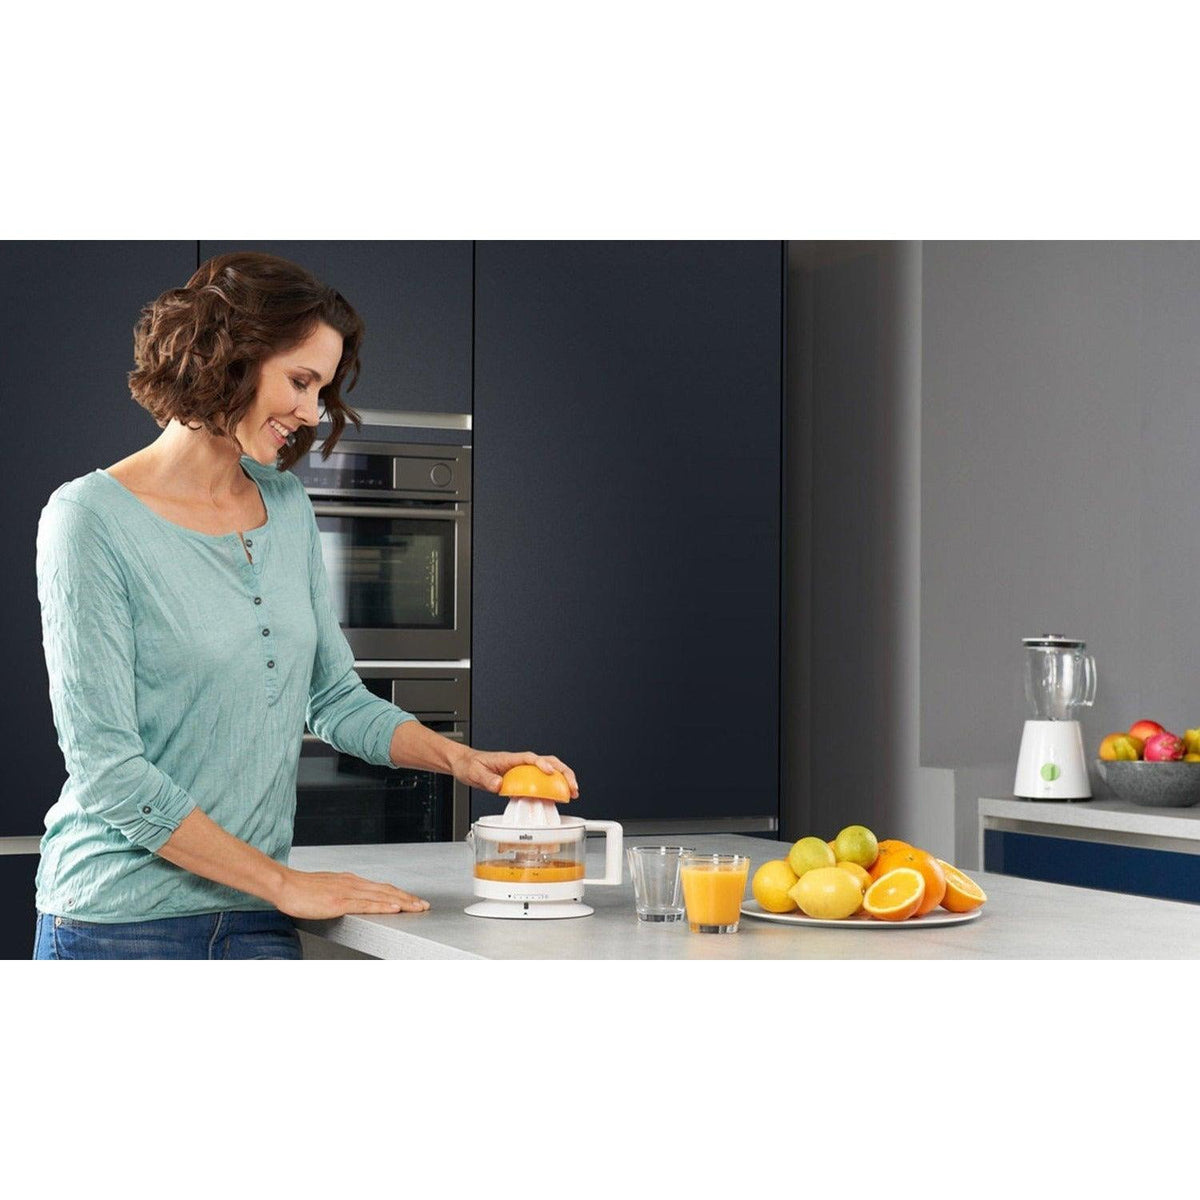 Braun Tribute Collection 20W Citrus Juicer - White | CJ3000 from DID Electrical - guaranteed Irish, guaranteed quality service. (6890746216636)